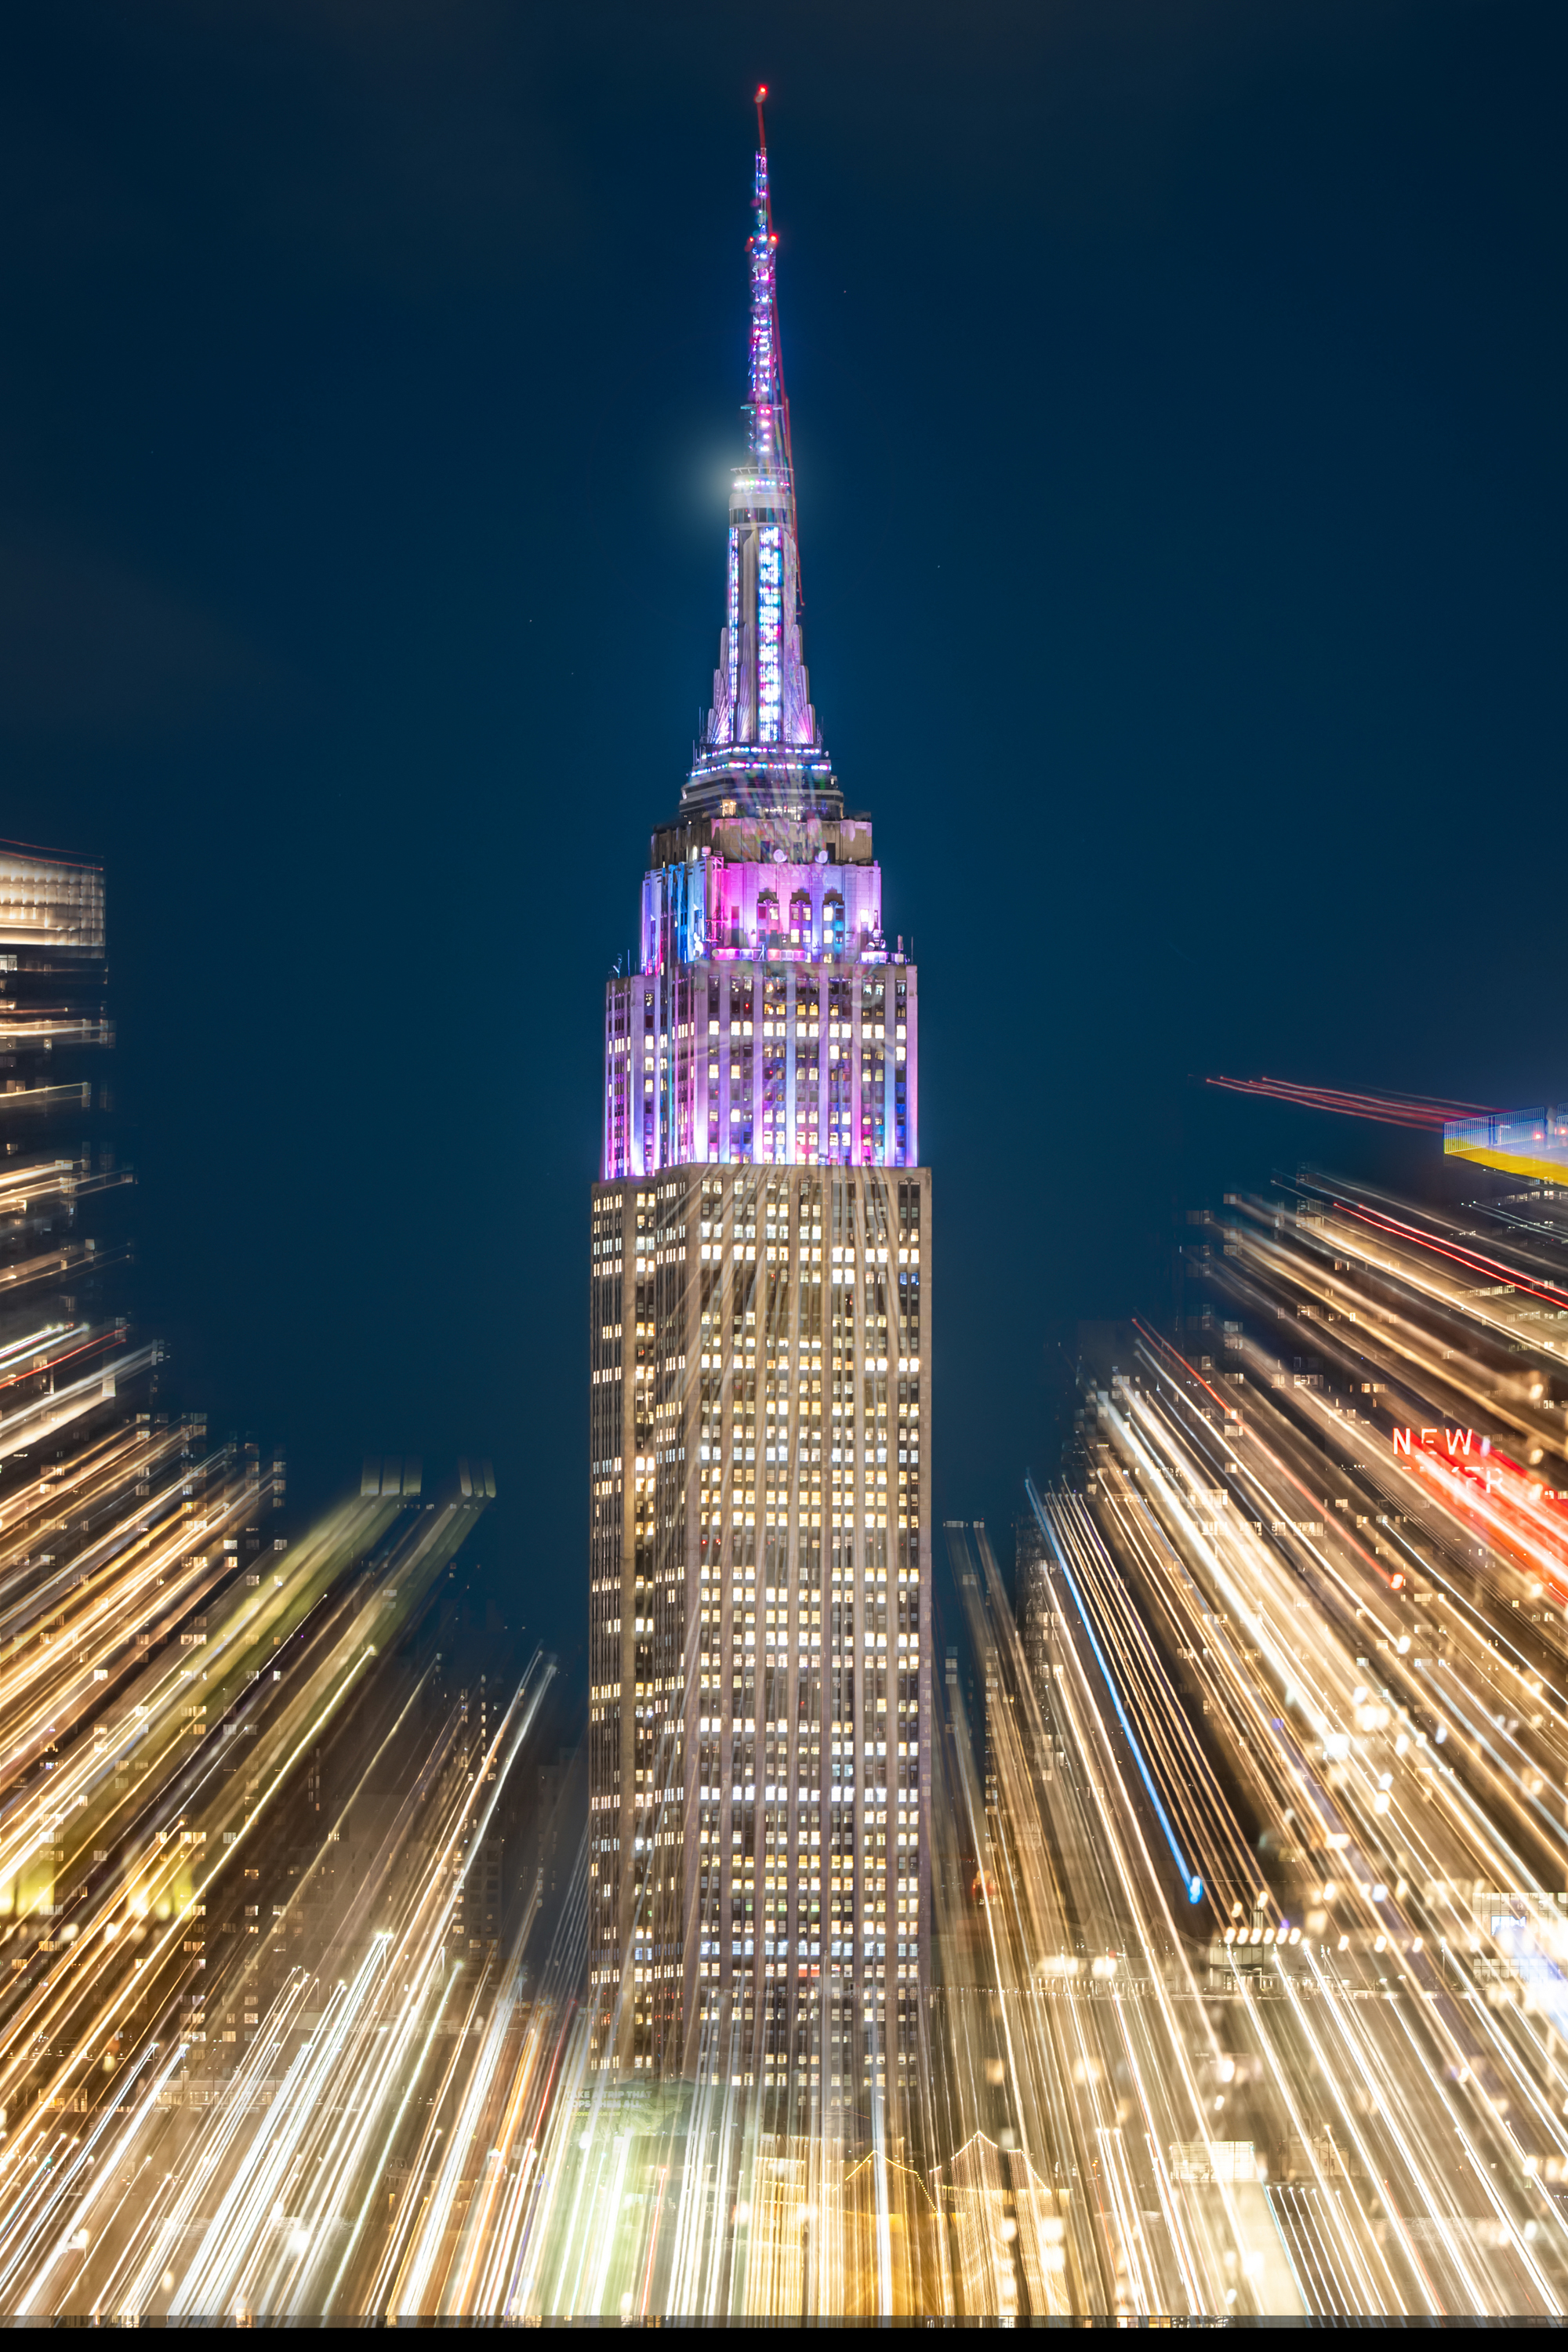 The Empire State Building framed in lights